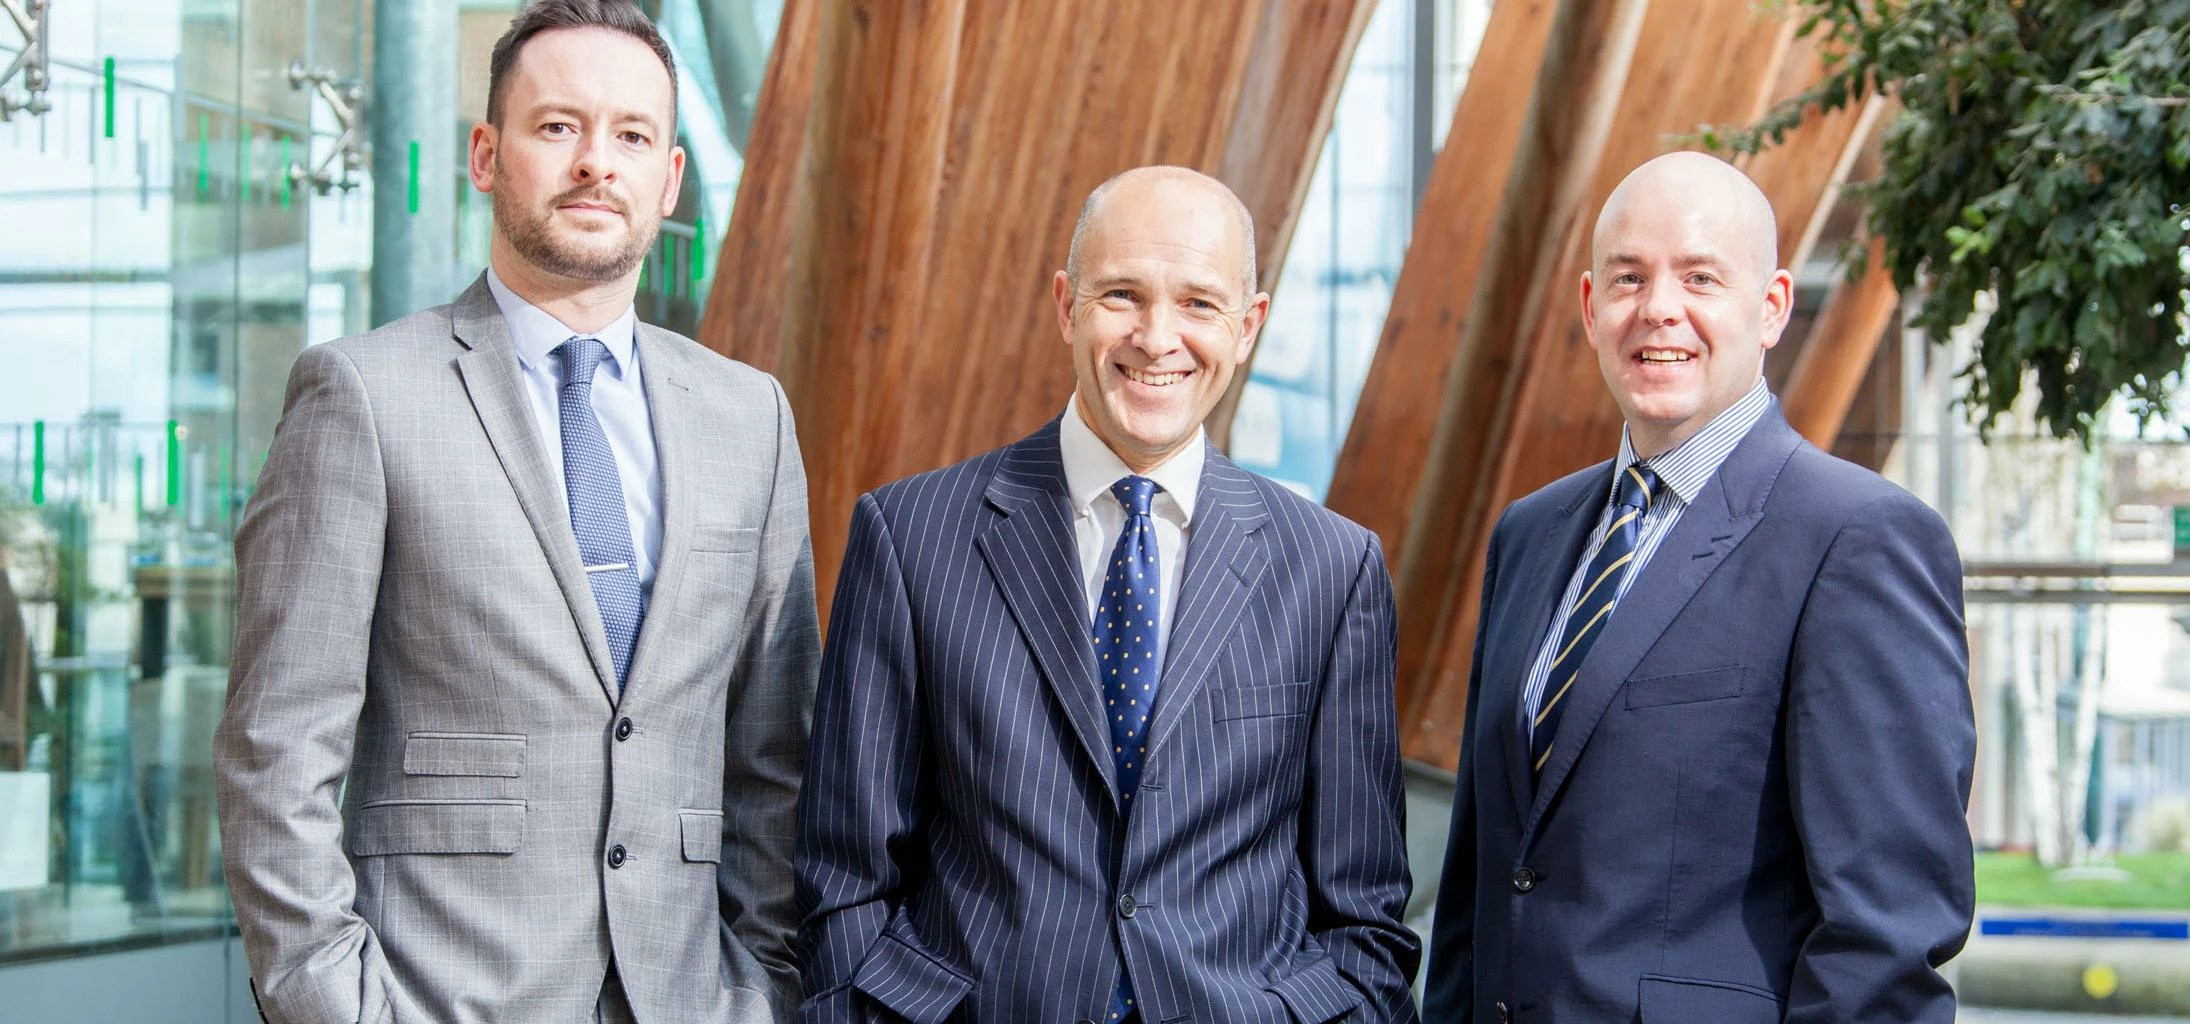 Head of busines legal services, Rob Moore (centre), welcomes Richard Dale (left) and James Parden (r